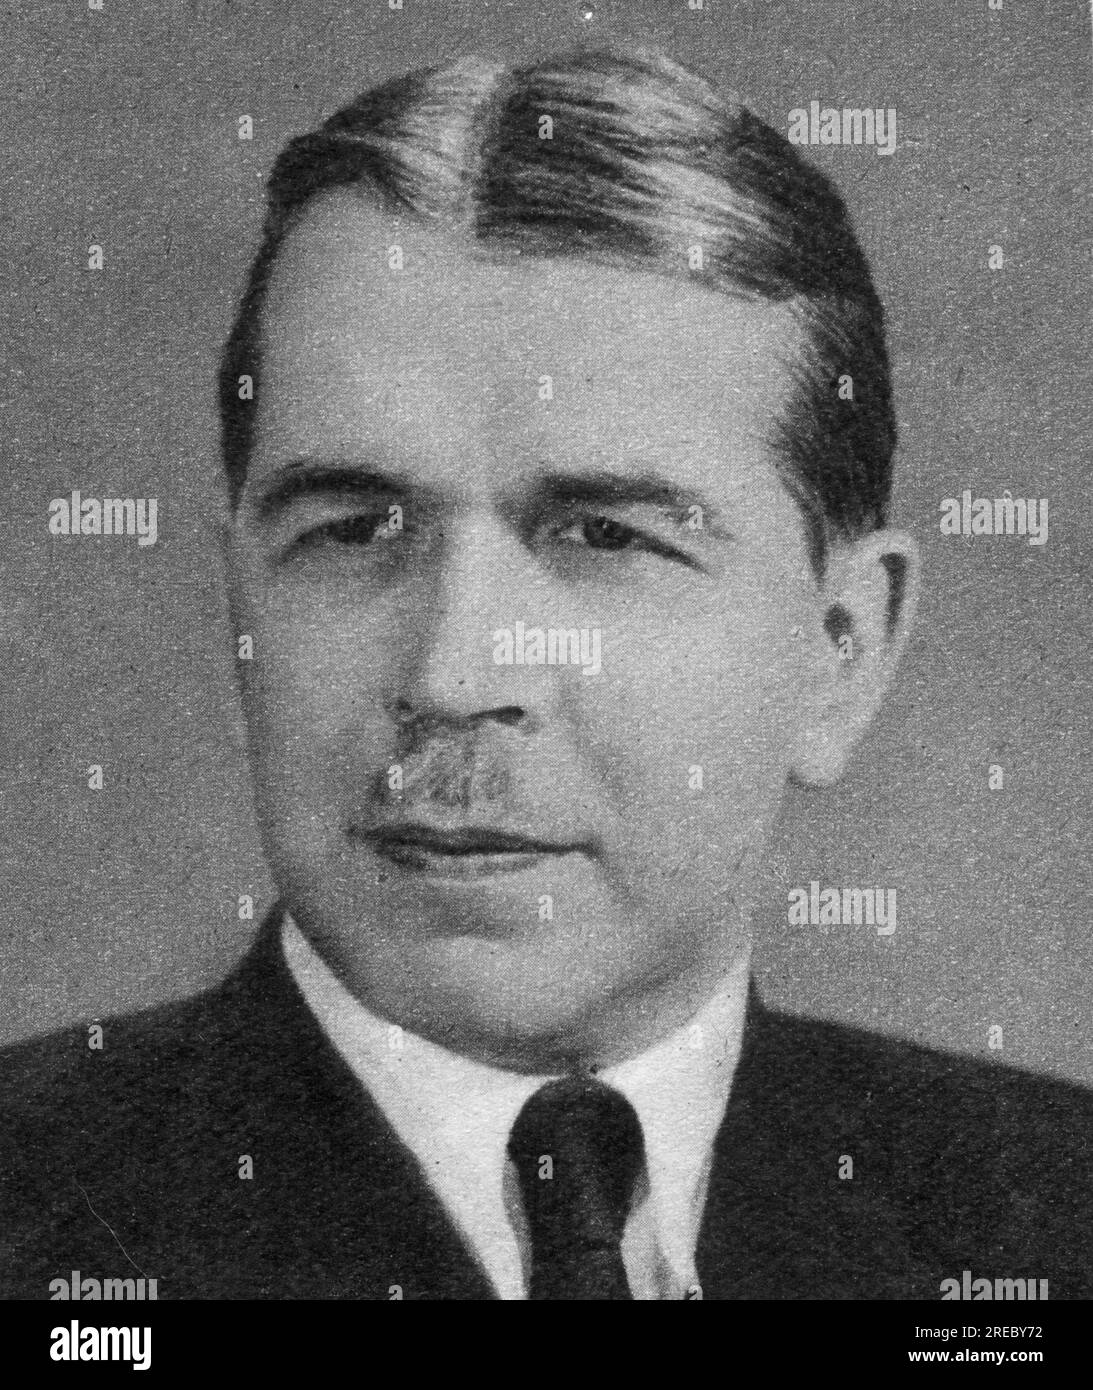 Wavilow, Sergej Iwanowitsch, 24.3.1891 - 25,1.1951, sowjetischer Physiker, Druck auf Foto, 1940er, ADDITIONAL-RIGHTS-CLEARANCE-INFO-NOT-AVAILABLE Stockfoto